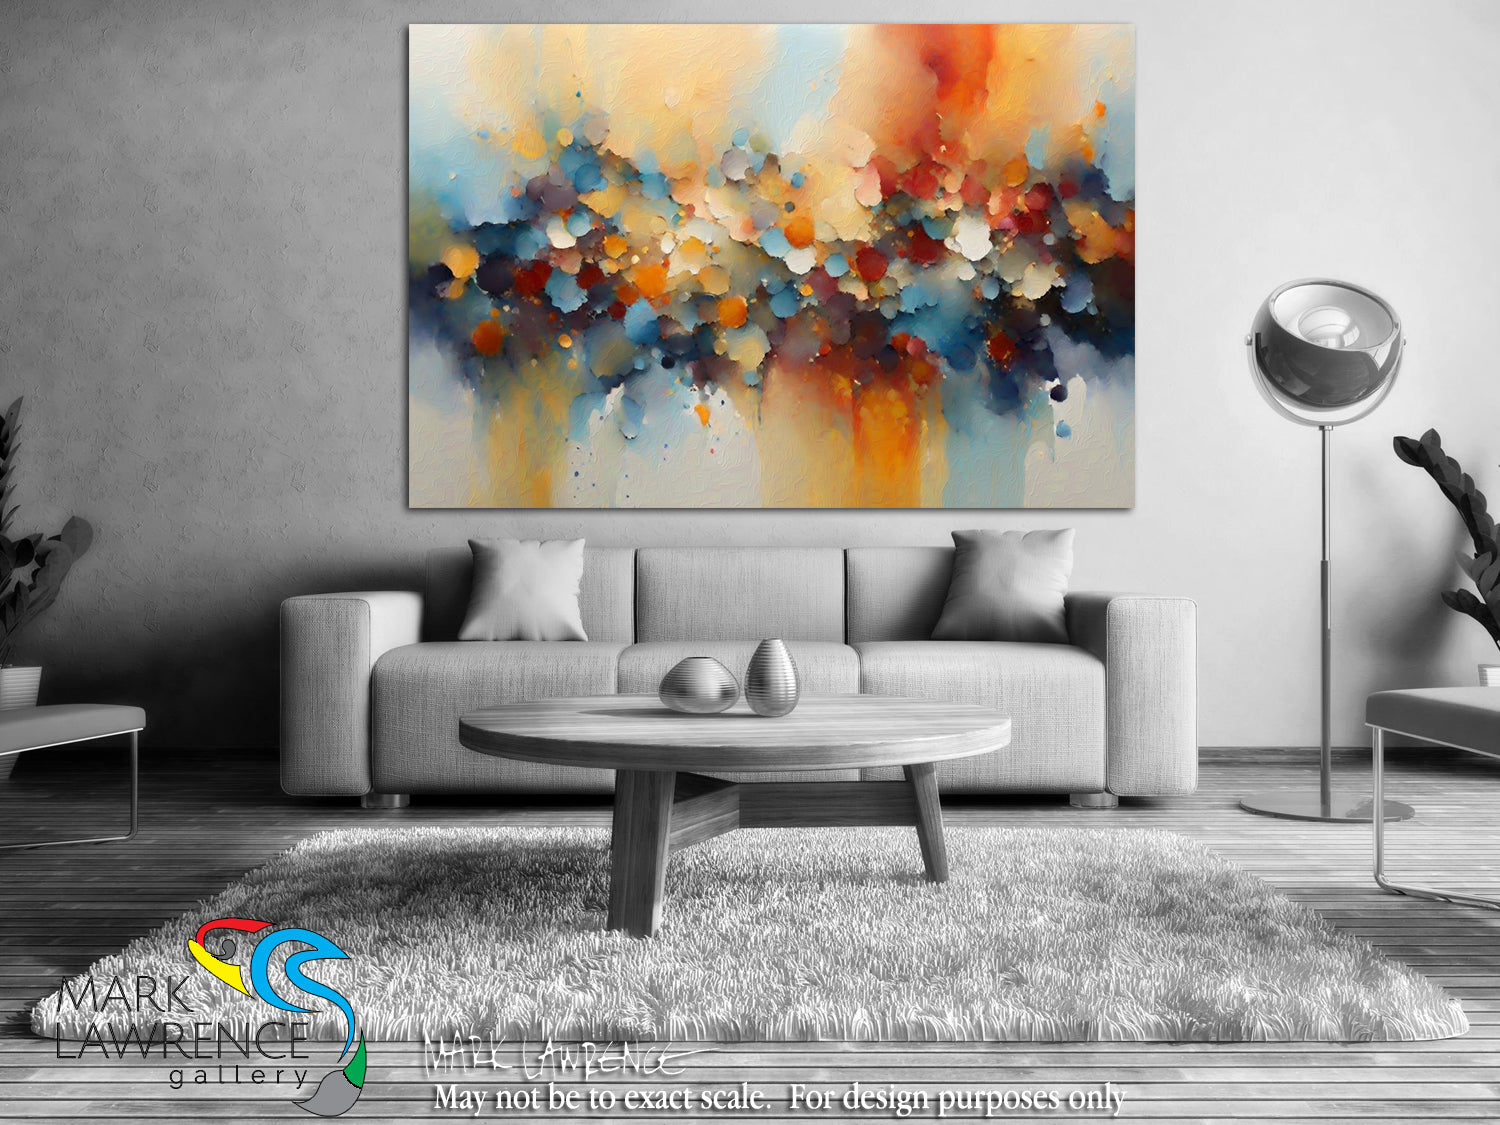 Interior Design Inspiration- Matthew 5:7. Blessed Are the Merciful. Limited Edition Christian Modern Art. Hand embellished & textured giclee paintings with bold brush strokes by the artist. Signed & numbered. Museum quality on canvas wall art prints. Blessed are the merciful, for they shall obtain mercy. 